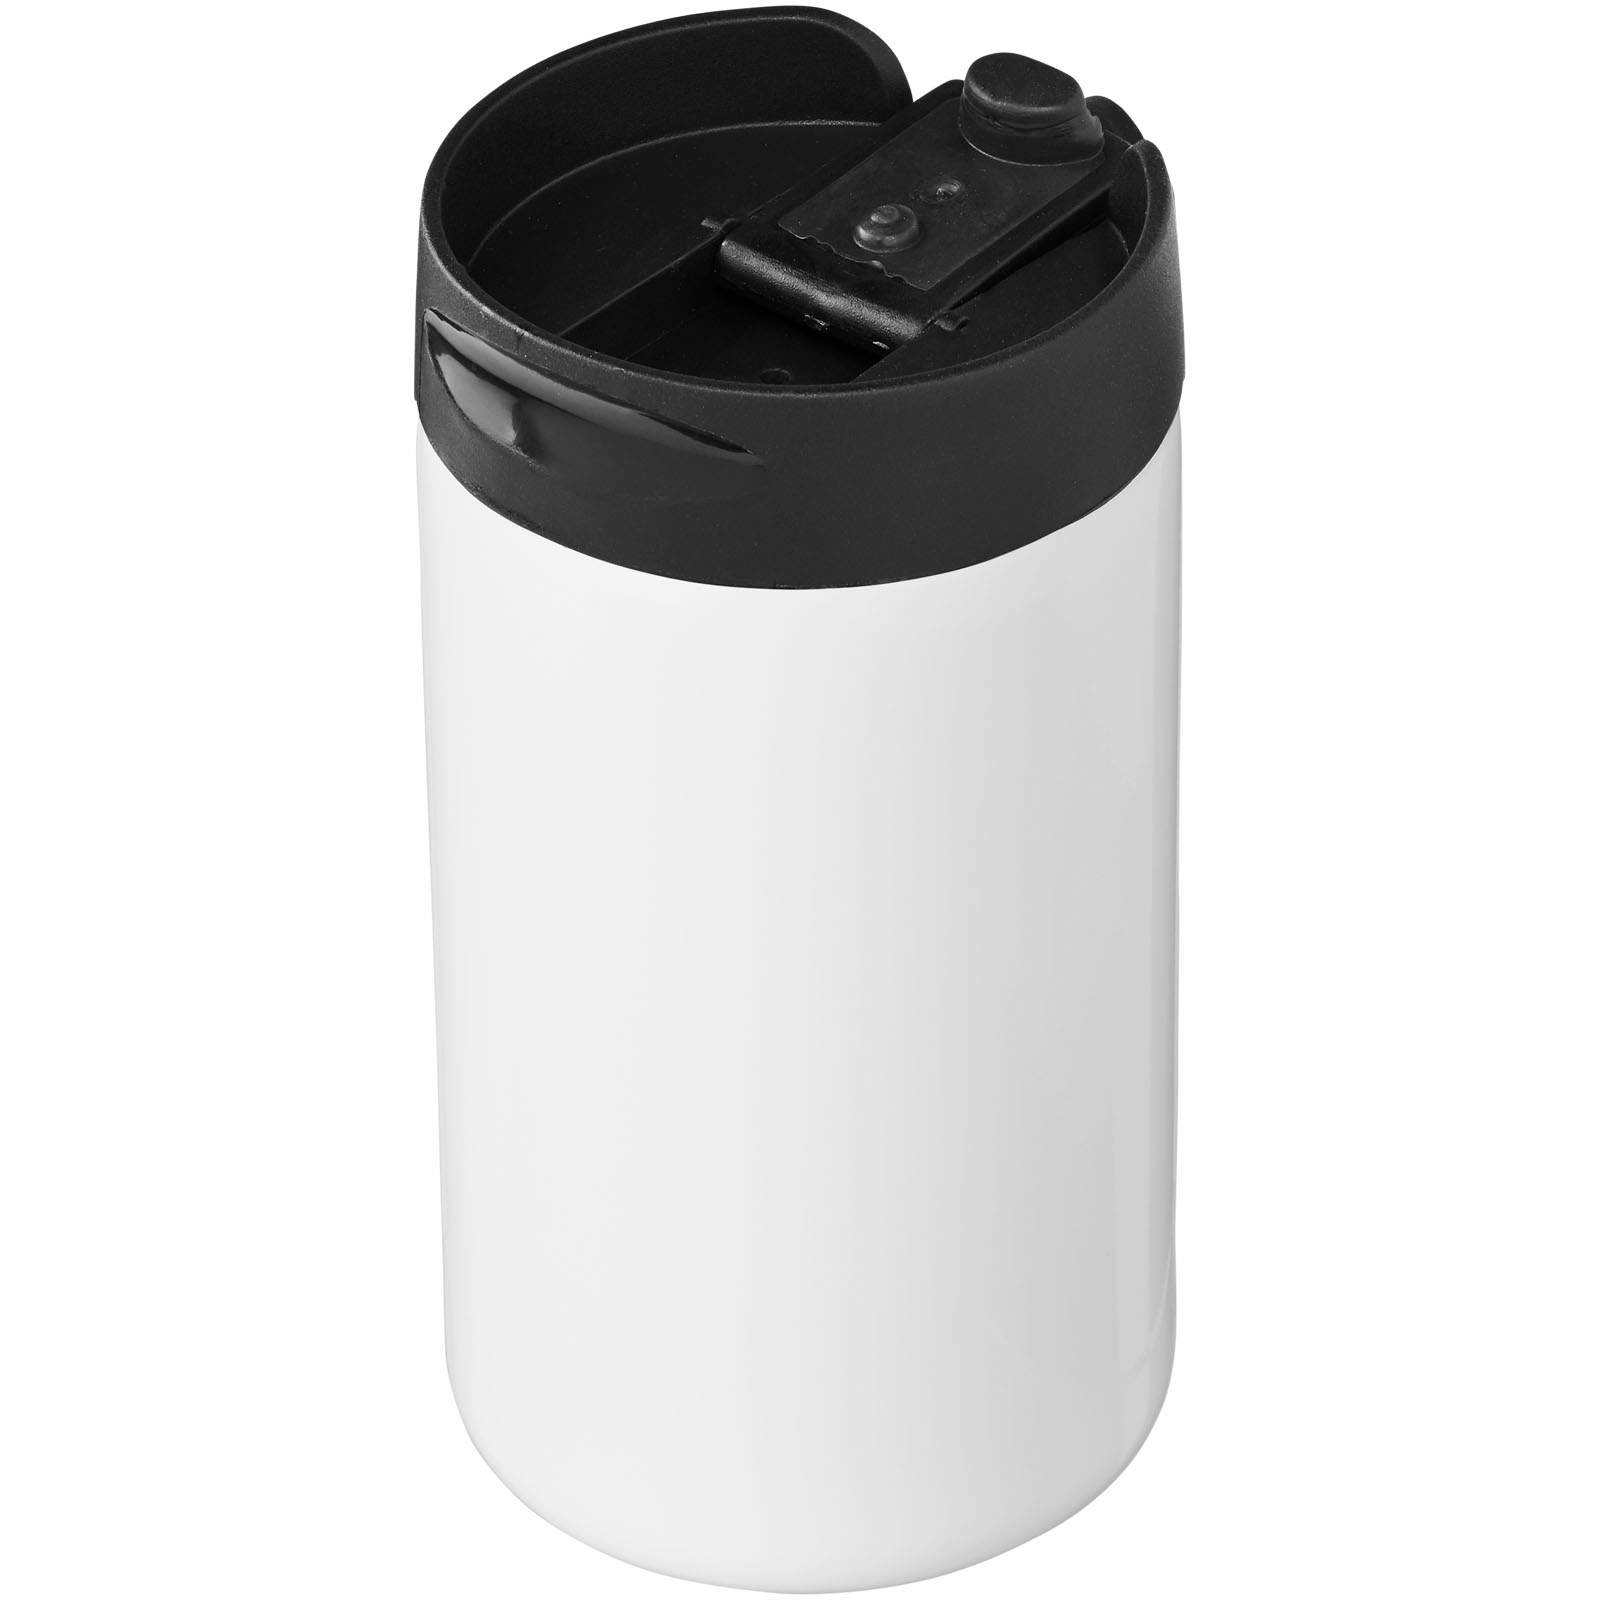 Mojave 300 ml RCS certified recycled stainless steel insulated tumbler